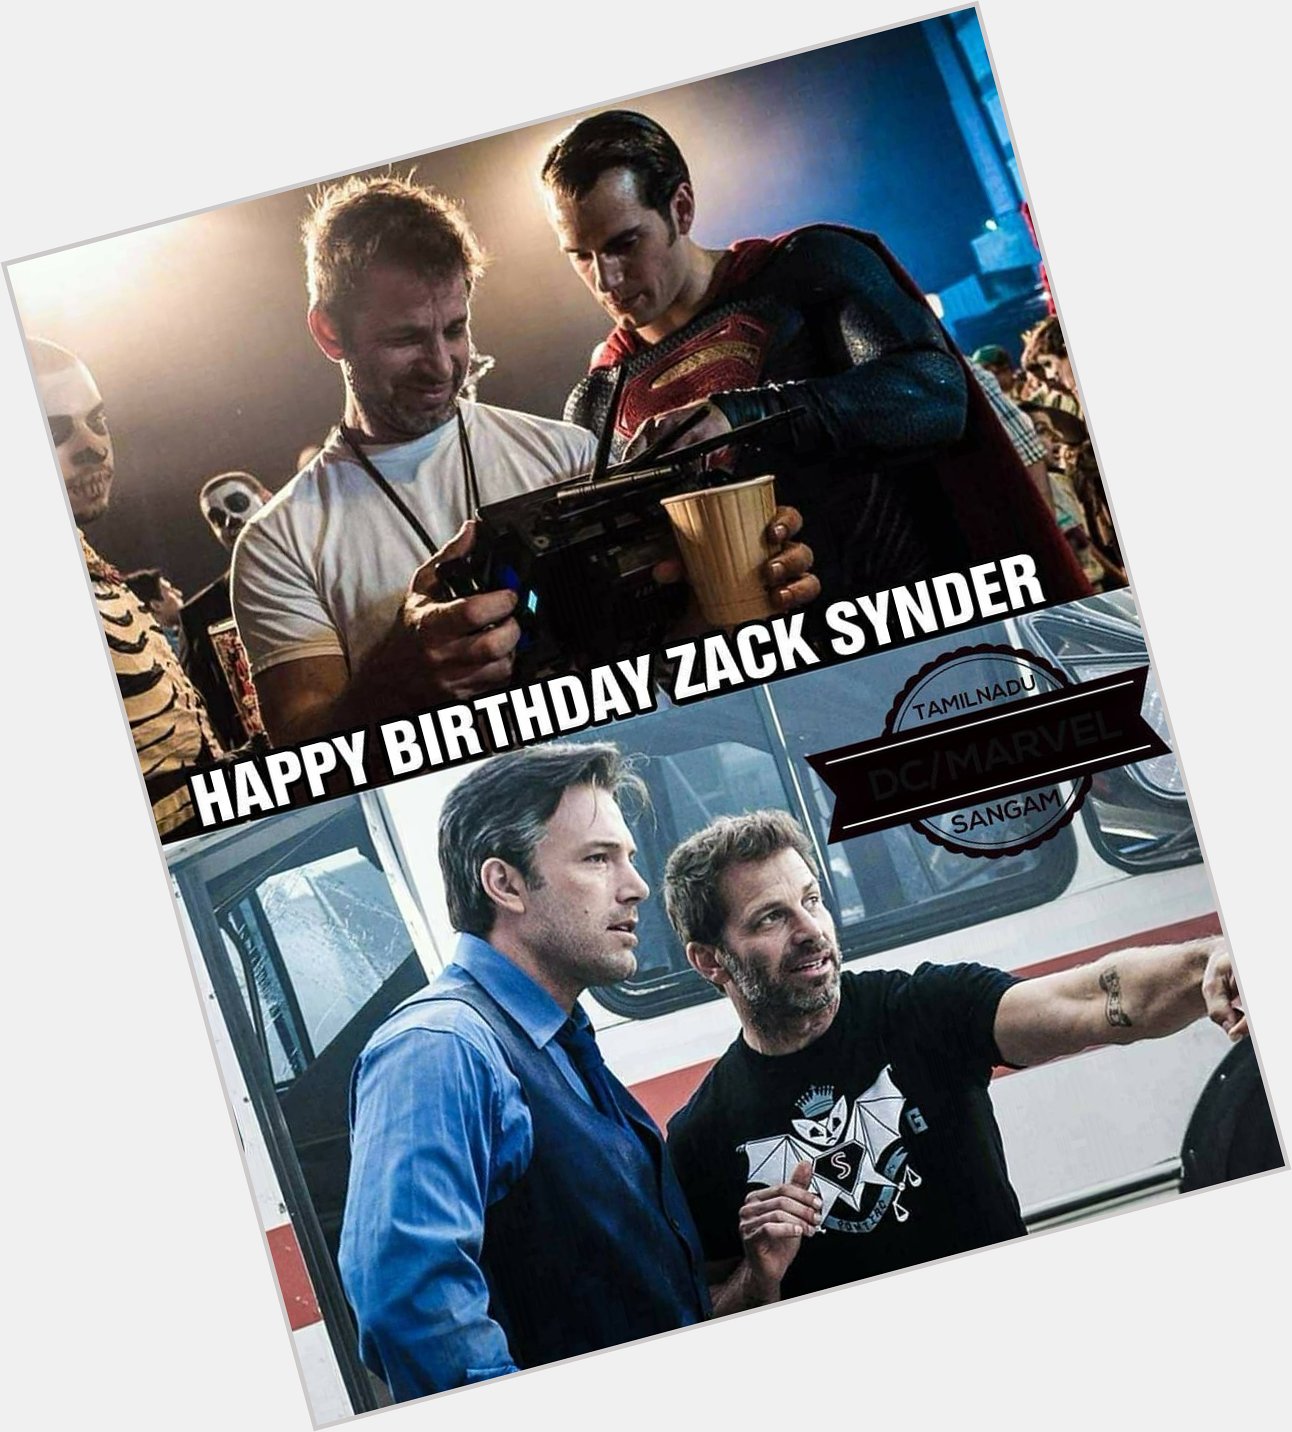 Happy Birthday Zack Snyder!! I absolutely adore his filmmaking   